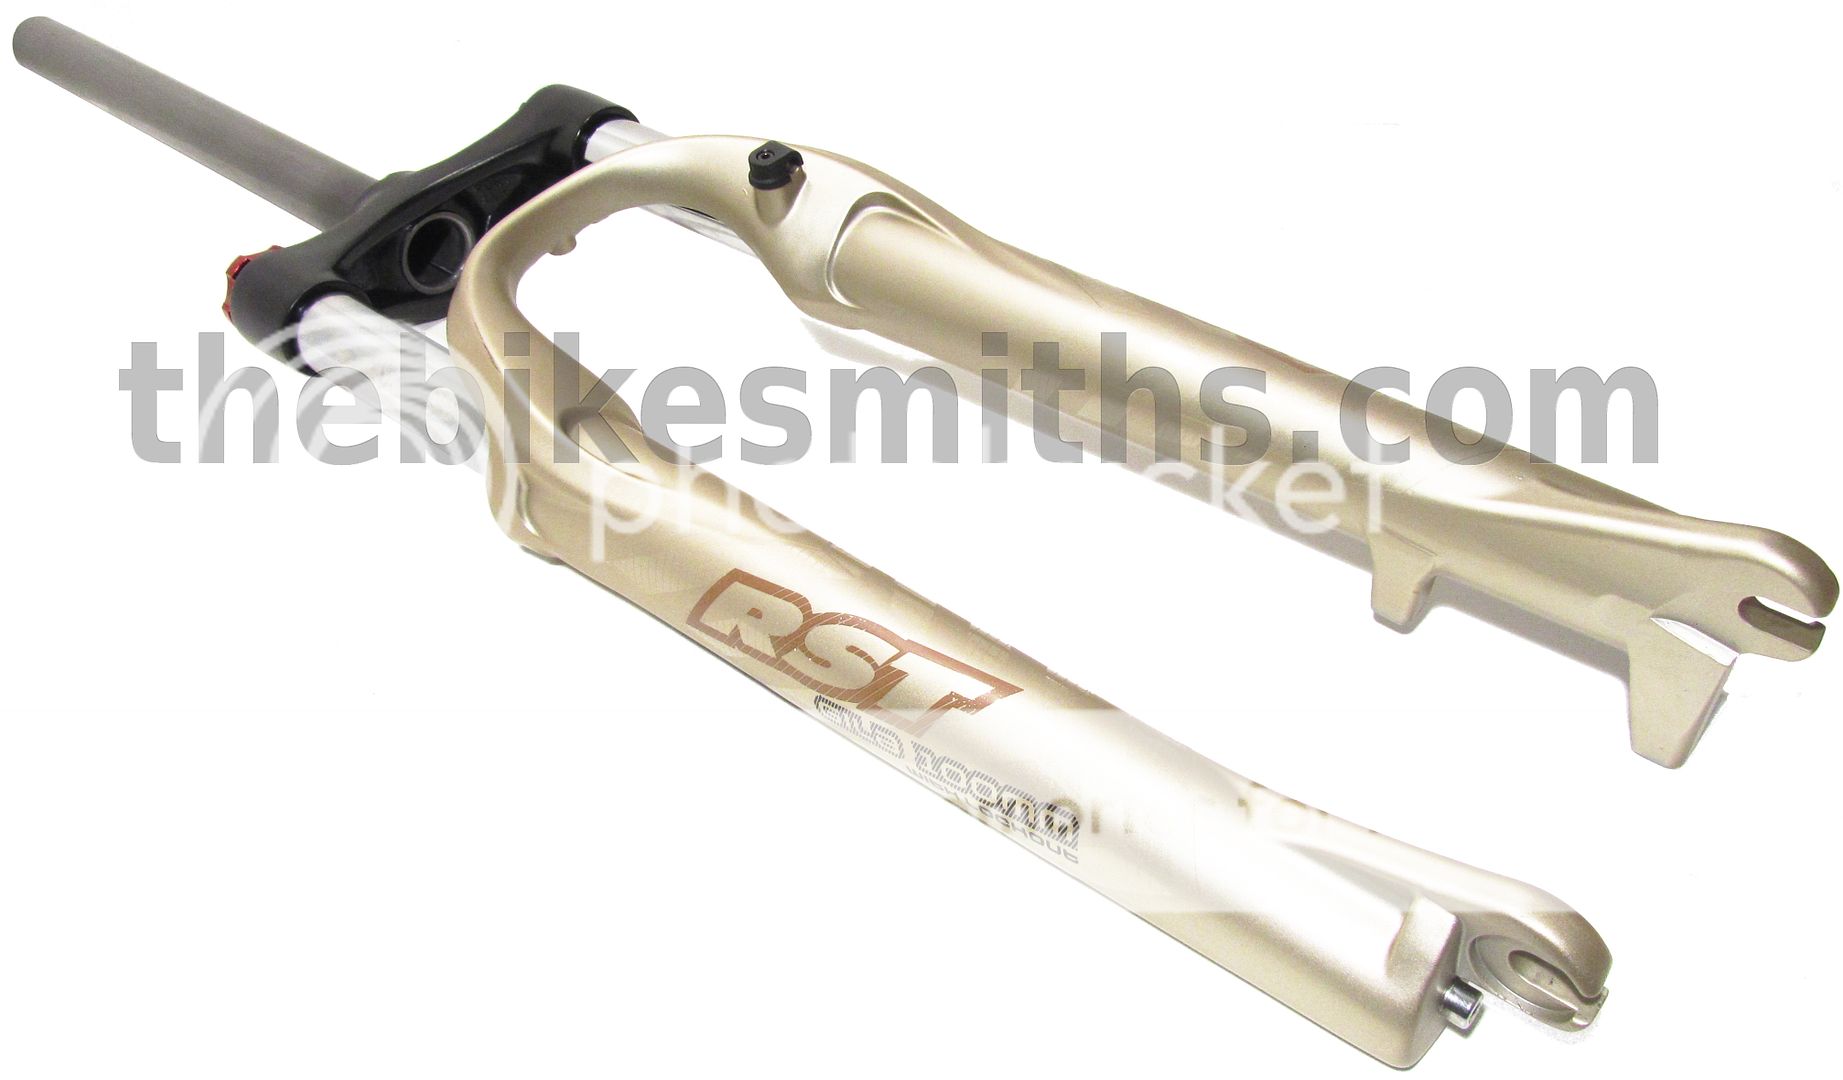  /hh70/thebikesmith/FORK/RST/RST%20GILA%20TnL/RST_GILA_TnL_a400